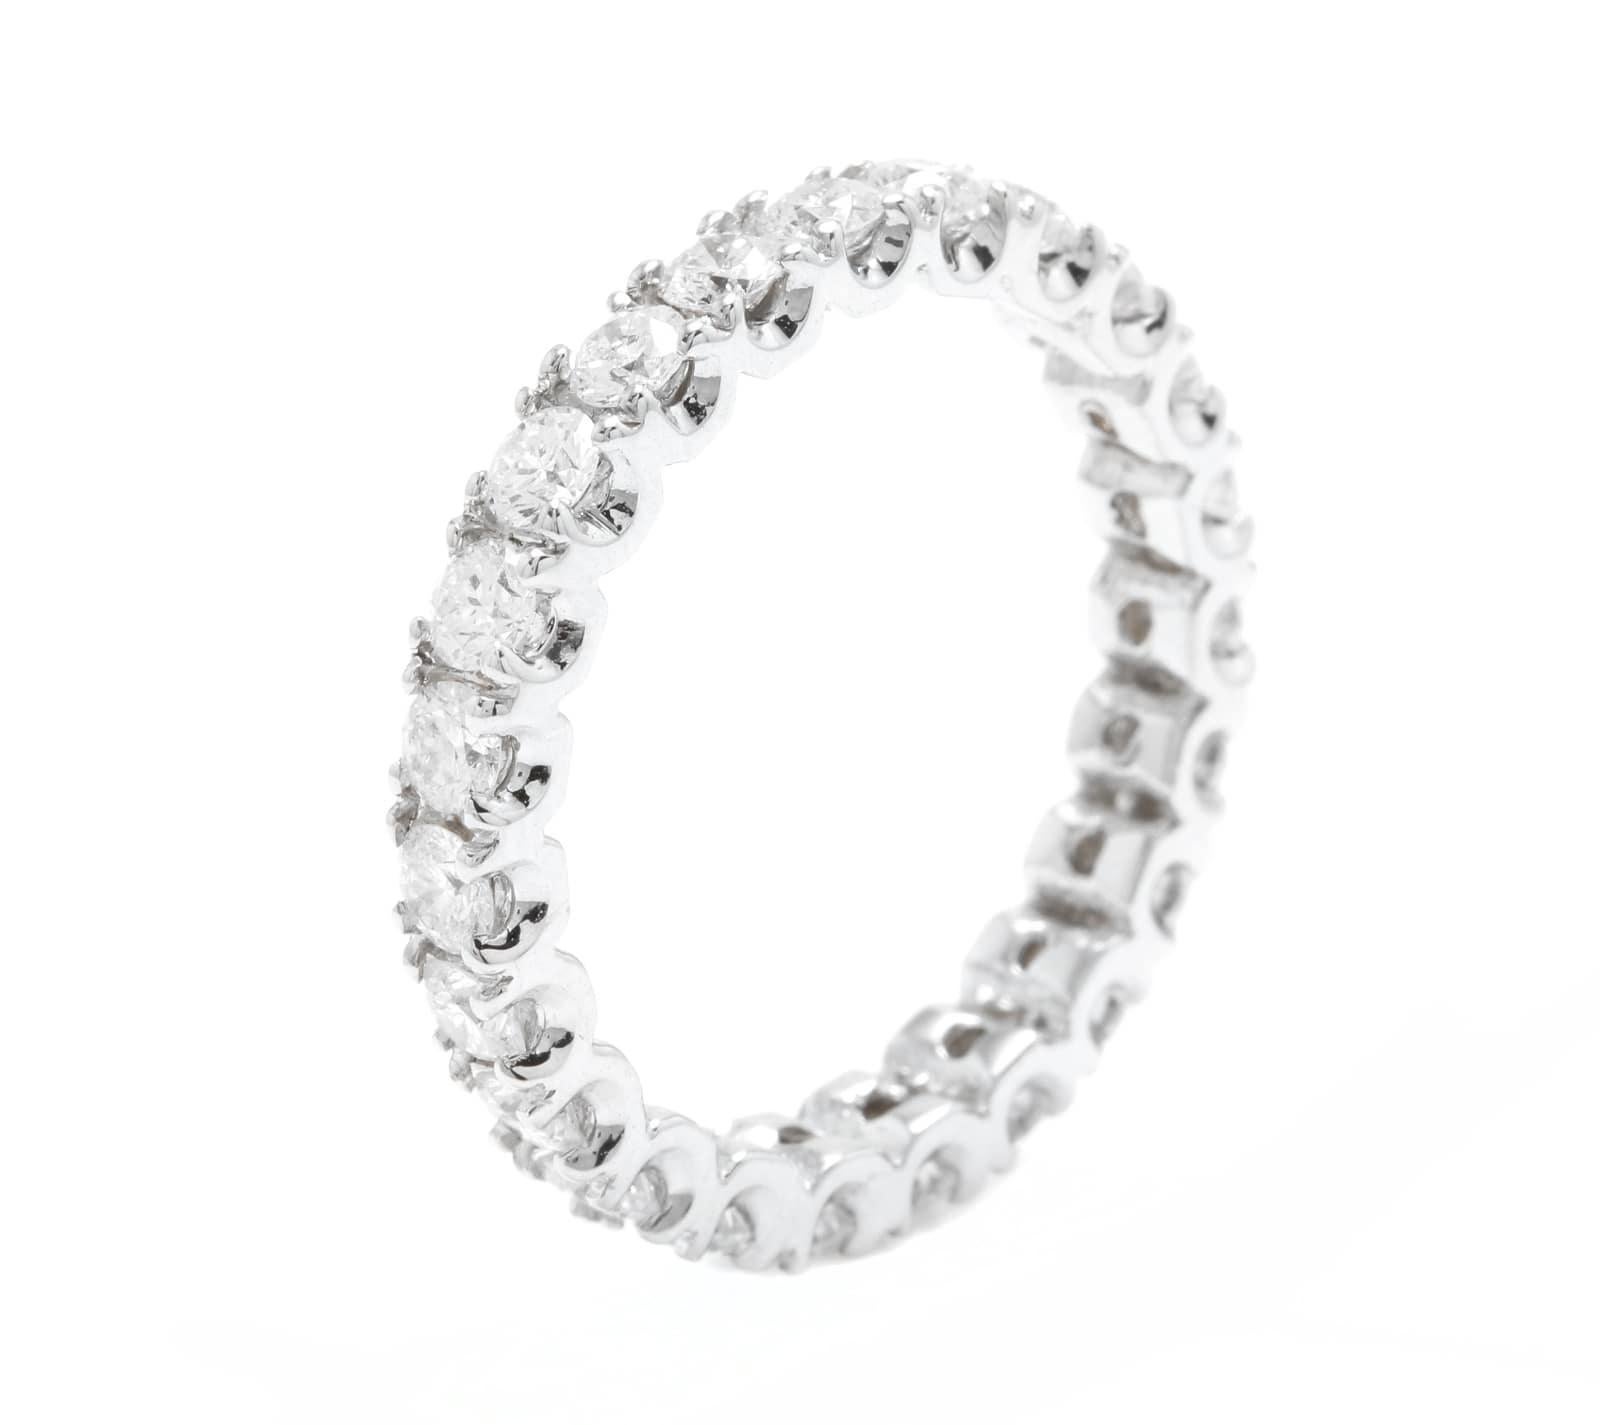 1.70 Carats Natural Diamond 14K Solid White Gold Eternity Ring

Suggested Replacement Value: Approx. $6,000.00

Total Natural Round Cut Diamonds Weight: Approx. 1.70 Carats (color G-H / Clarity SI1-SI2)

The width of the ring is: 3.2mm

Ring size: 7